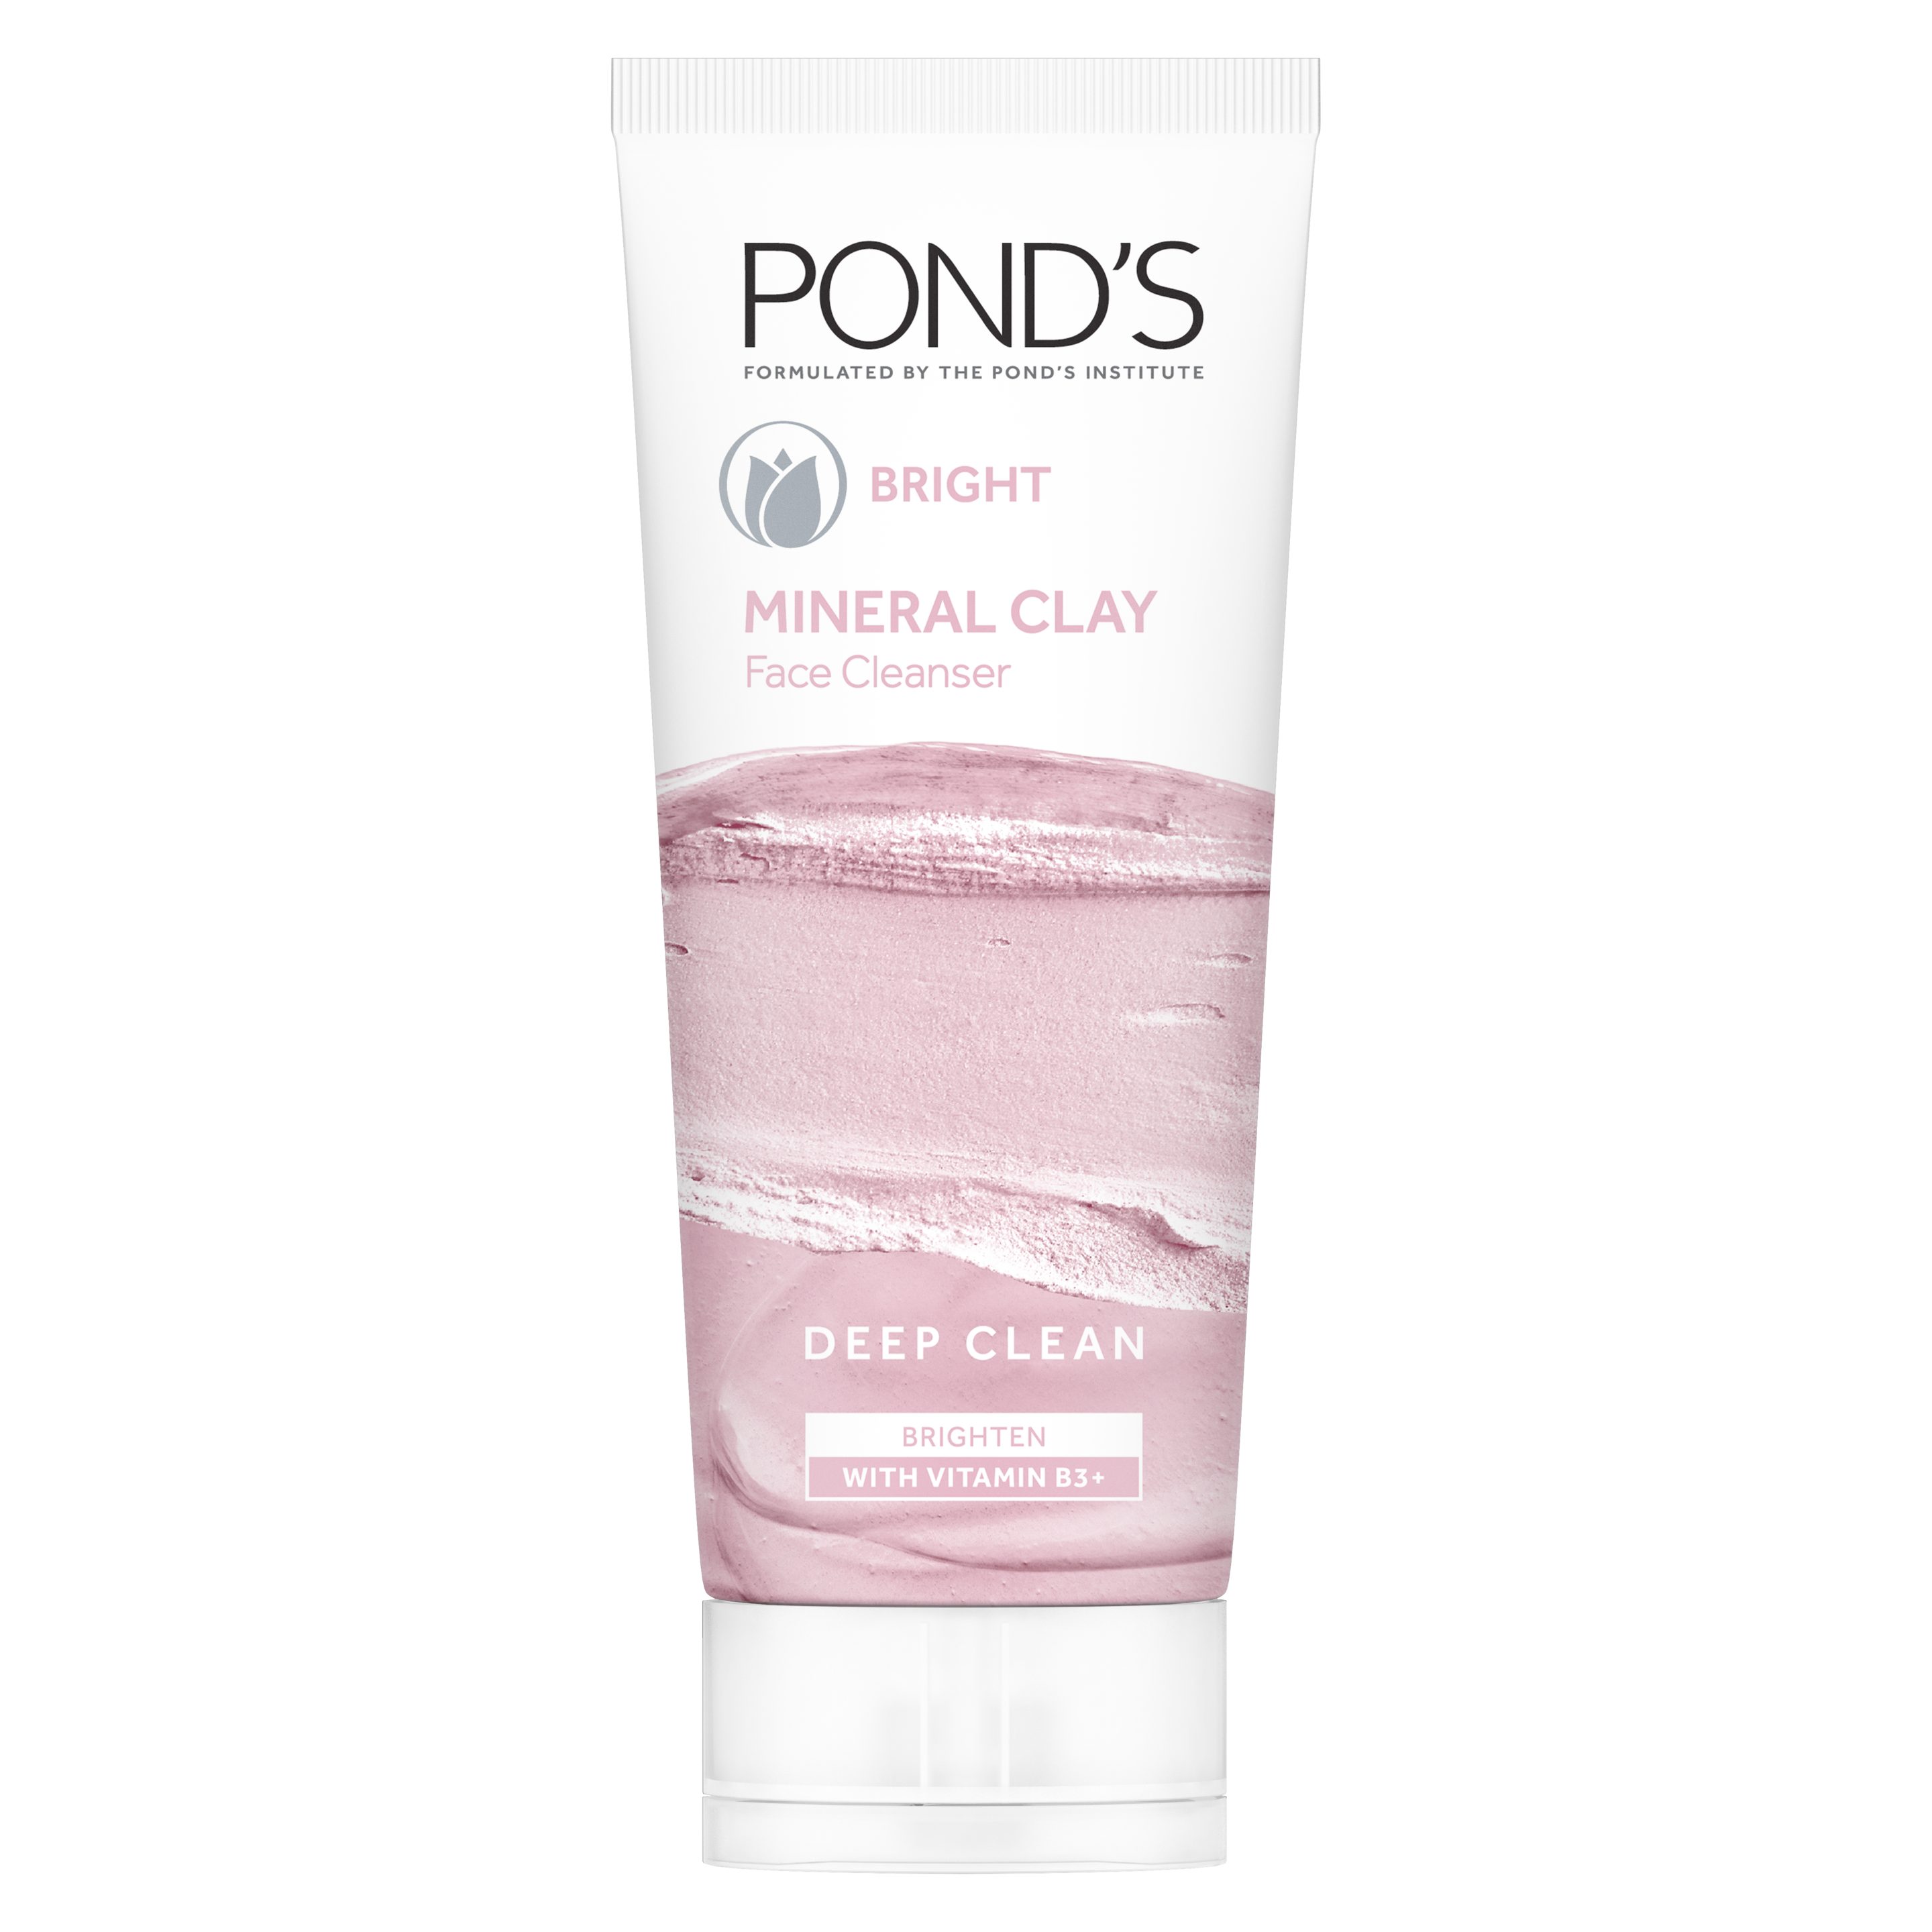 Pond's Bright Mineral Clay Facial Cleanser